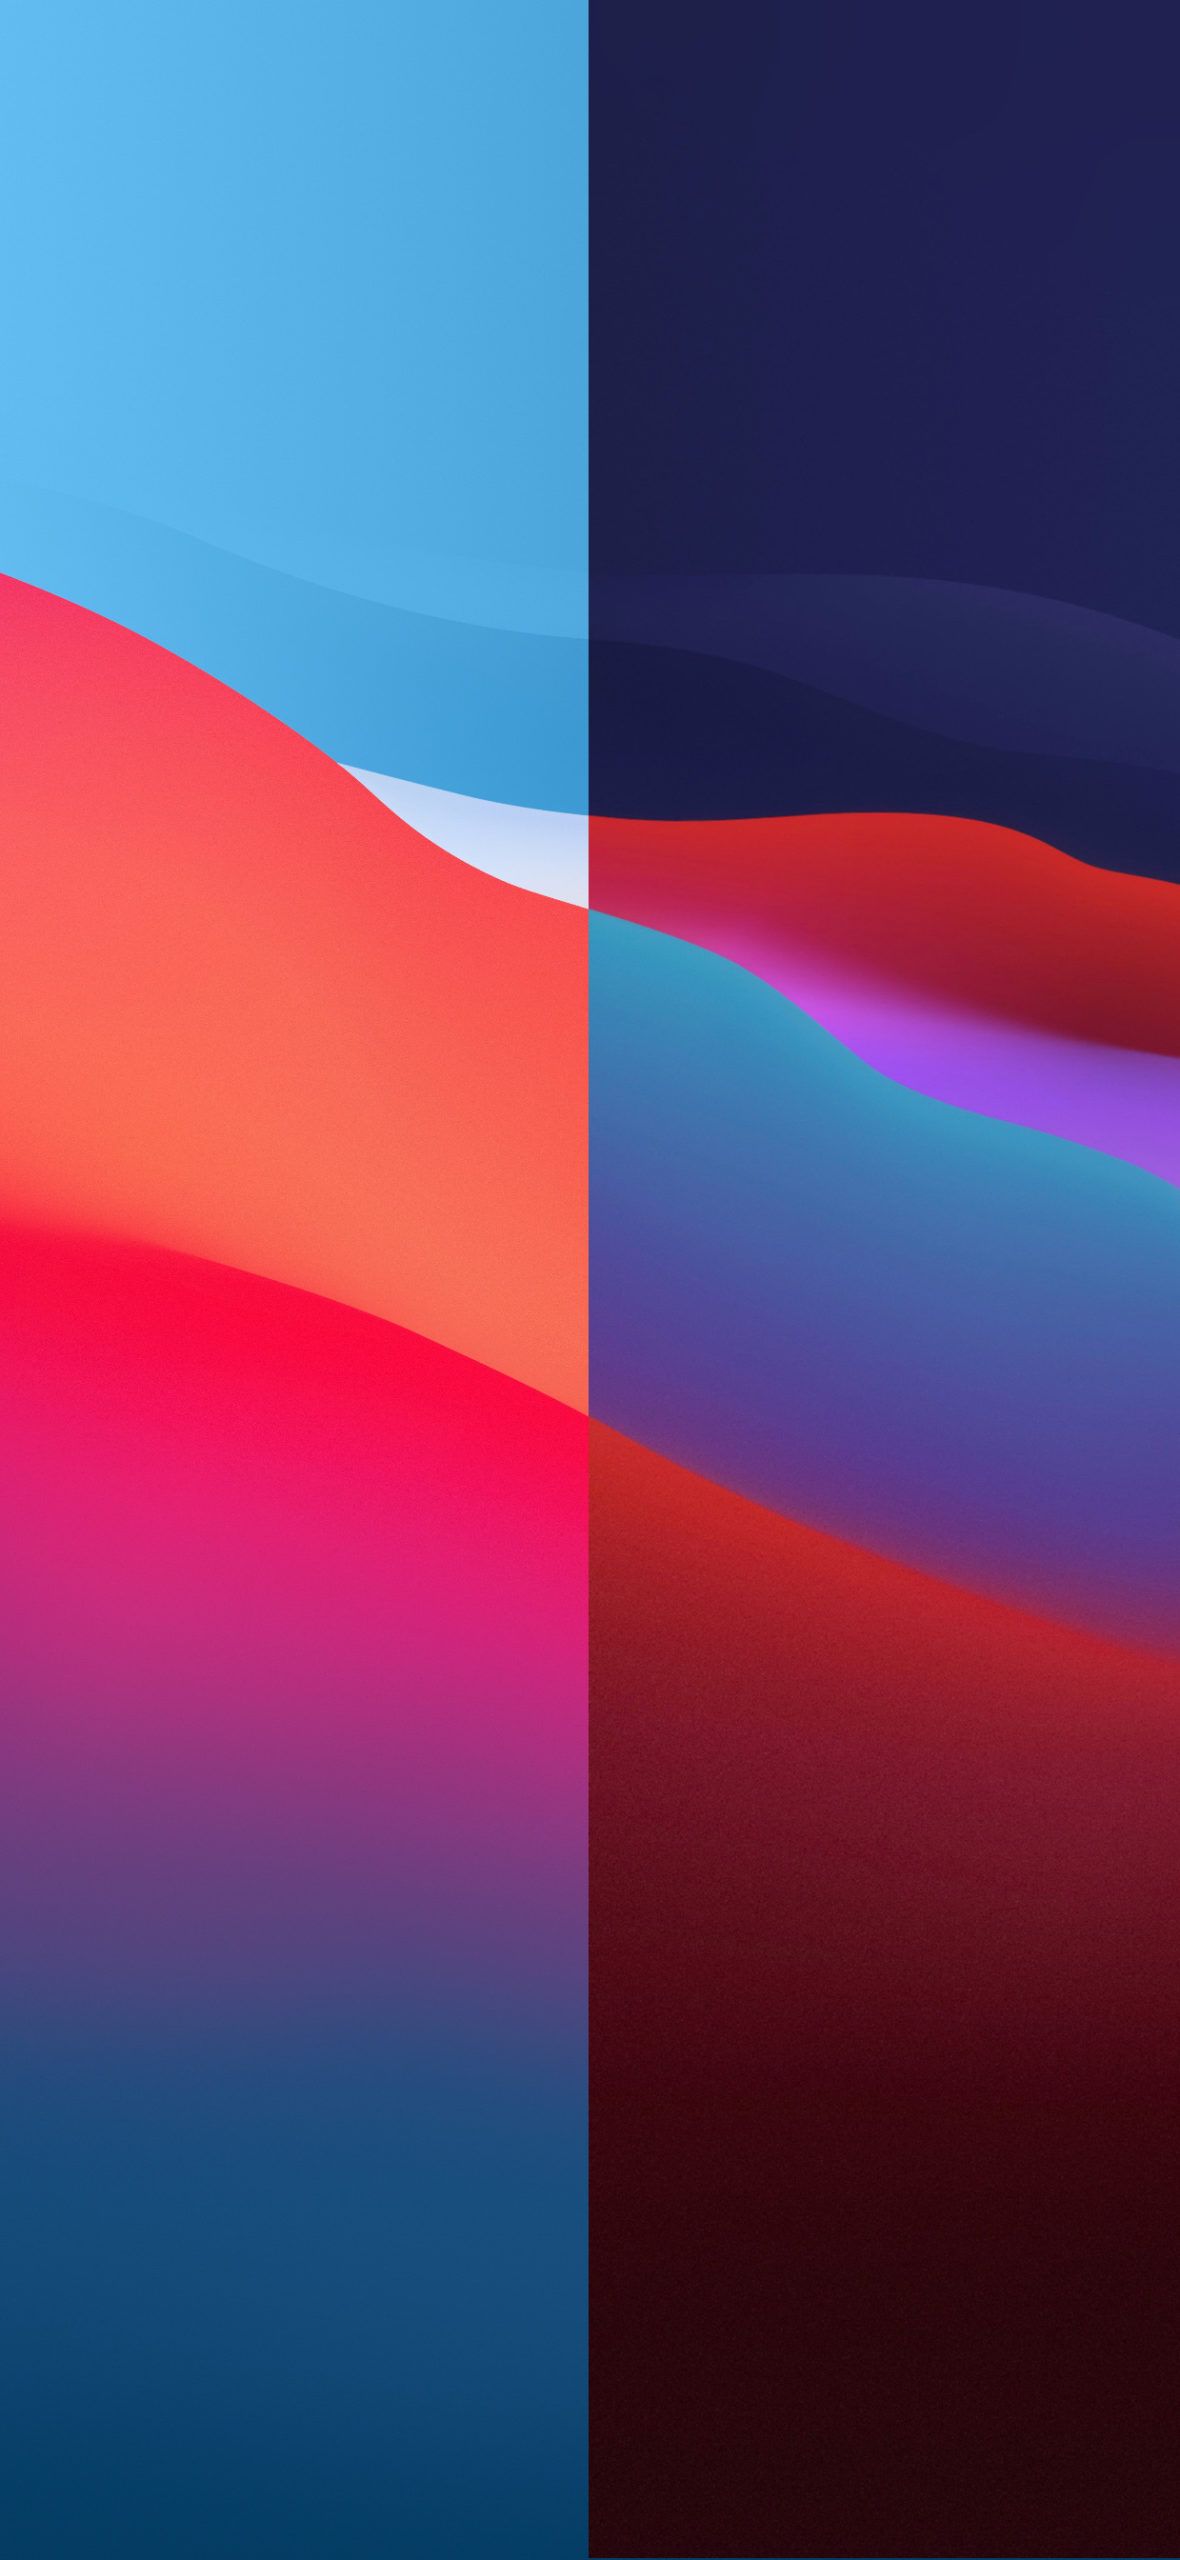 iOS 15 Wallpaper from Wallpaper Cave